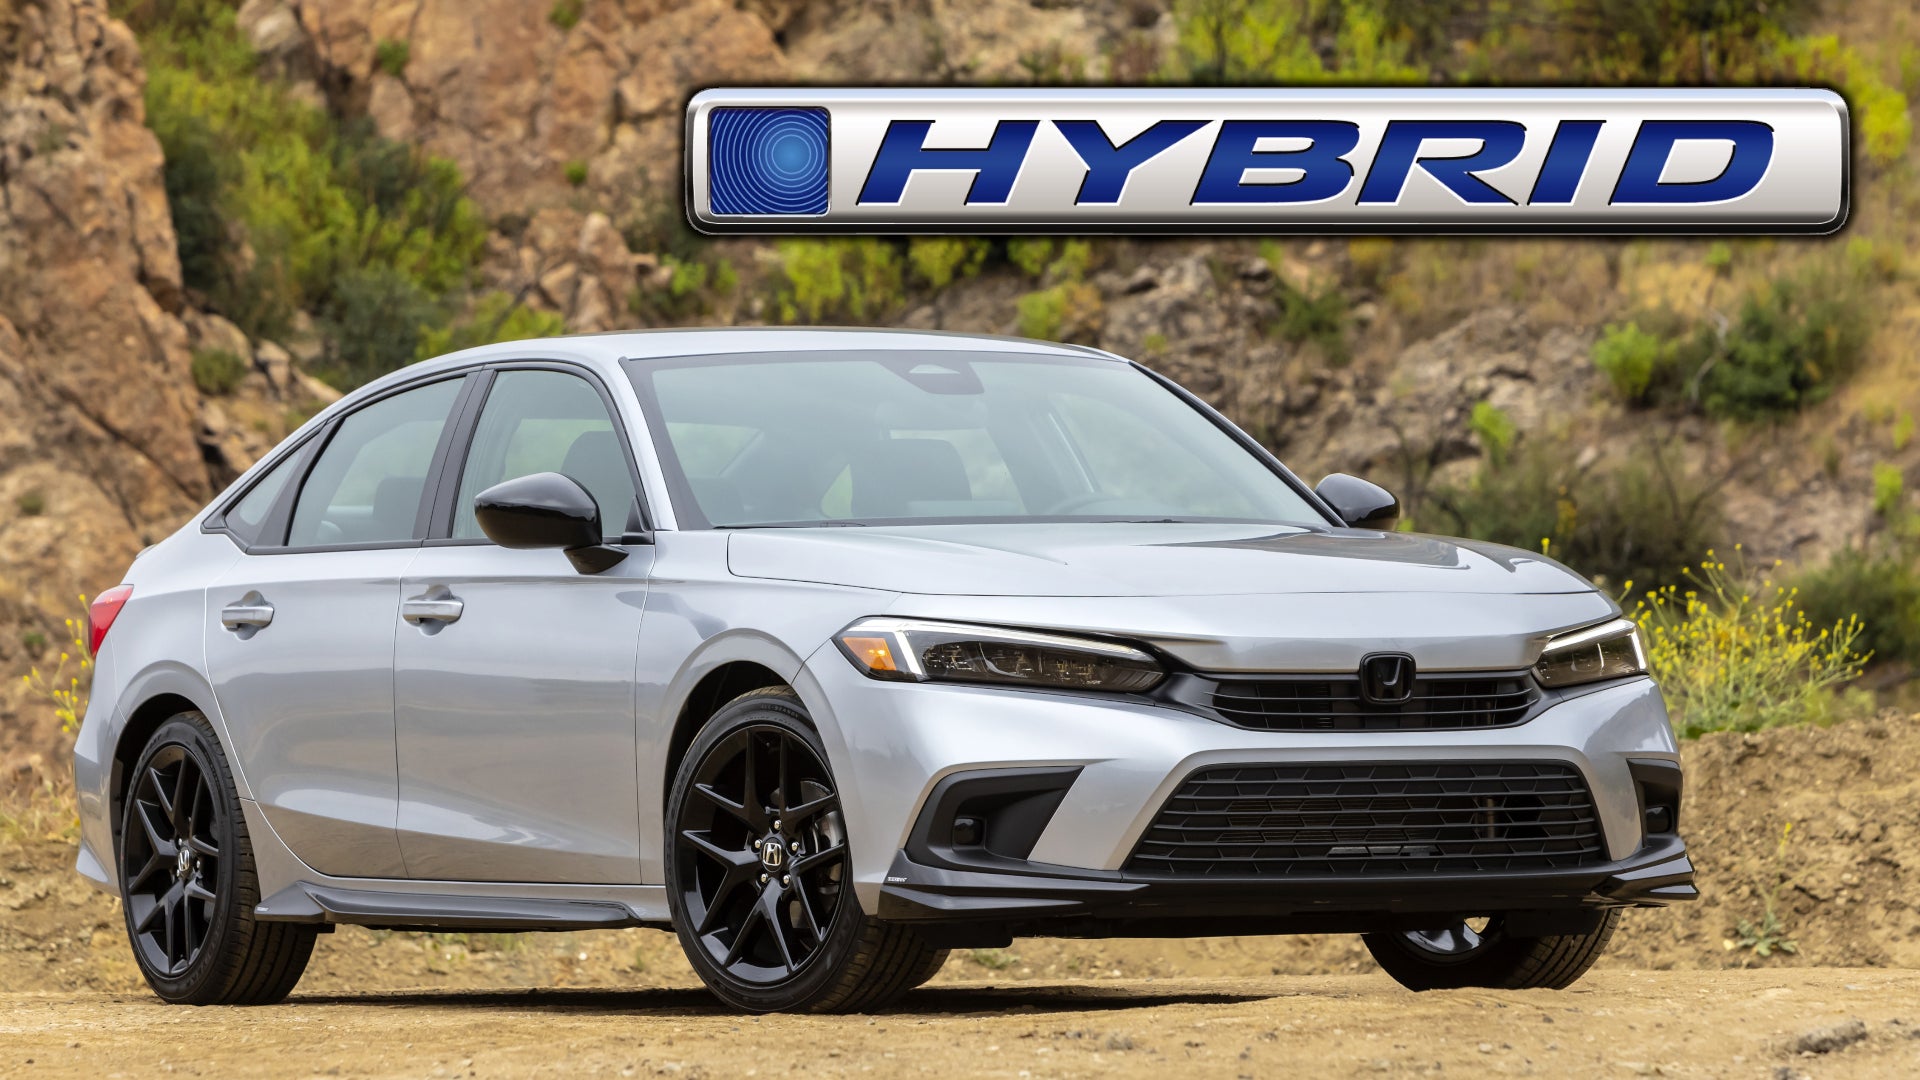 2024 Honda Civic Hybrid Returns to the US, Joining CR-V and Accord